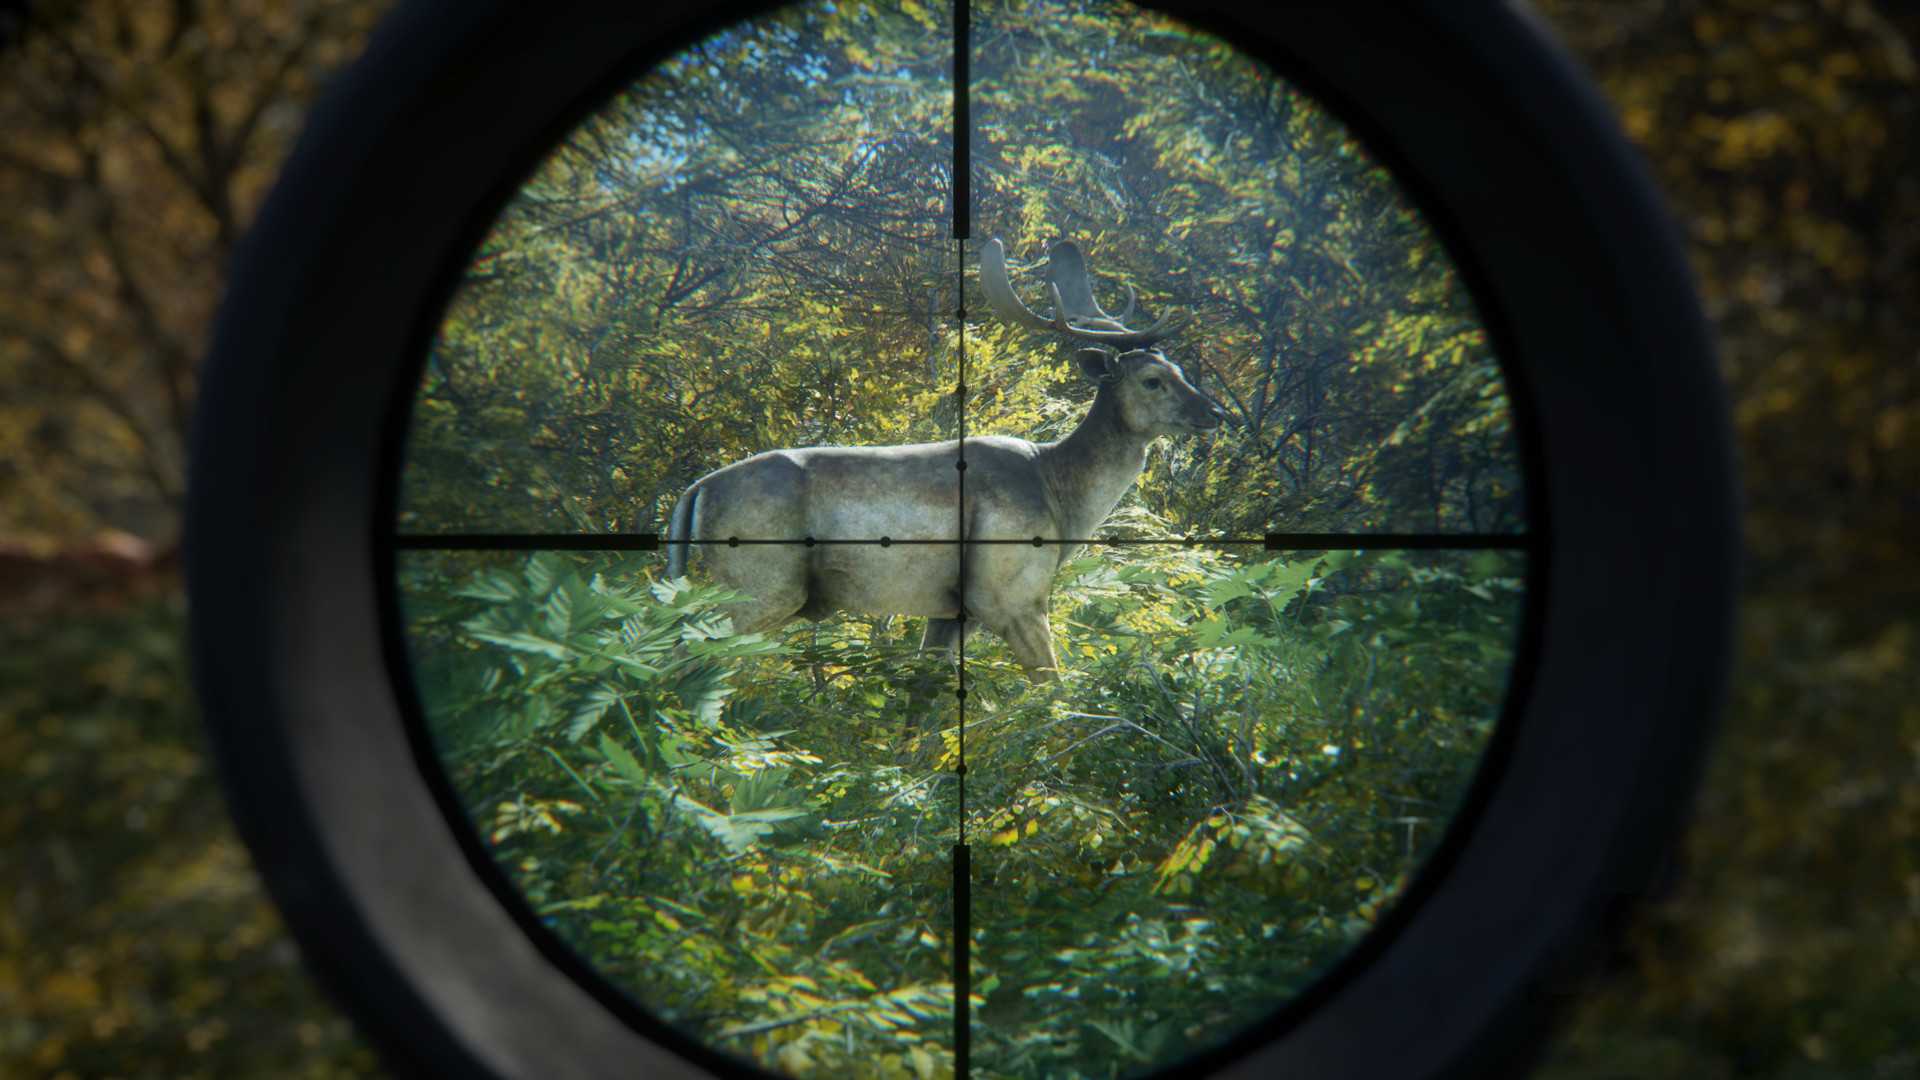 Call of the wild epic games. THEHUNTER: Call of the Wild. Игра охота the Hunter Call of the Wild. The Hunter Call of the Wild ПС 4. THEHUNTER: Call of the Wild v.2175916.